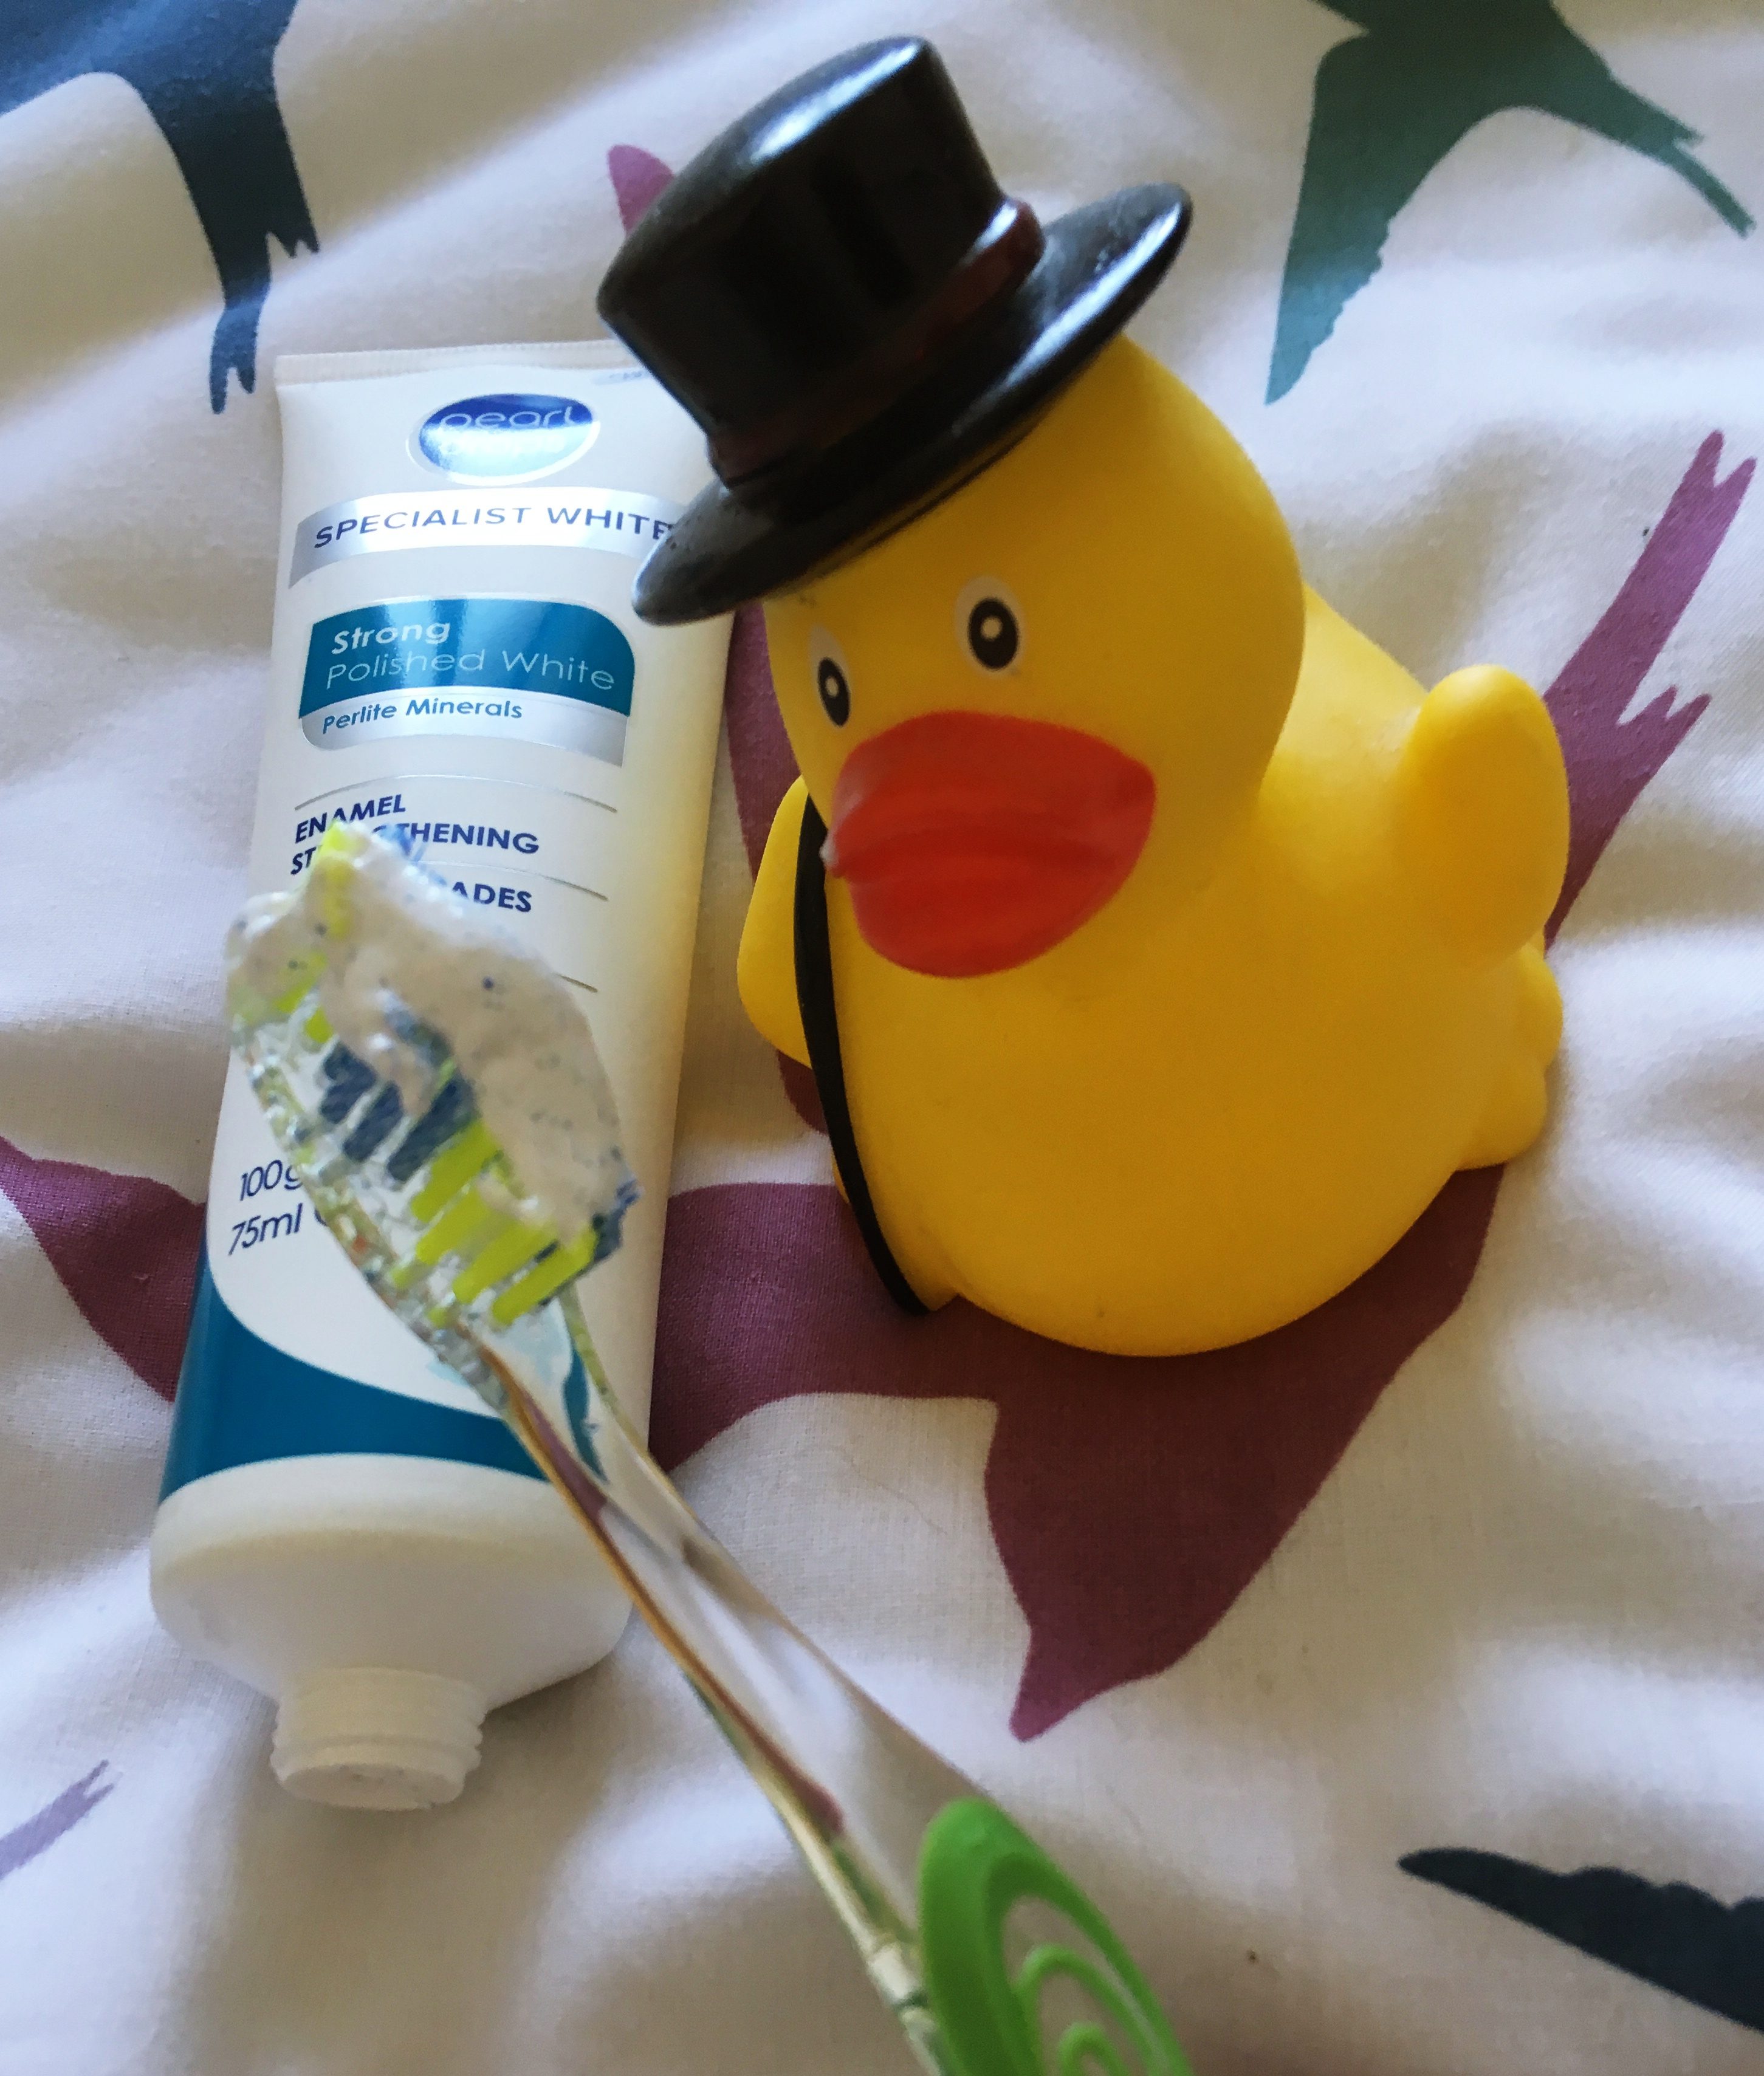 A photo of the toothpaste tube on my bed cover set next to a rubber duck, and my toothbrush to the front with a blob of the toothpaste on it.